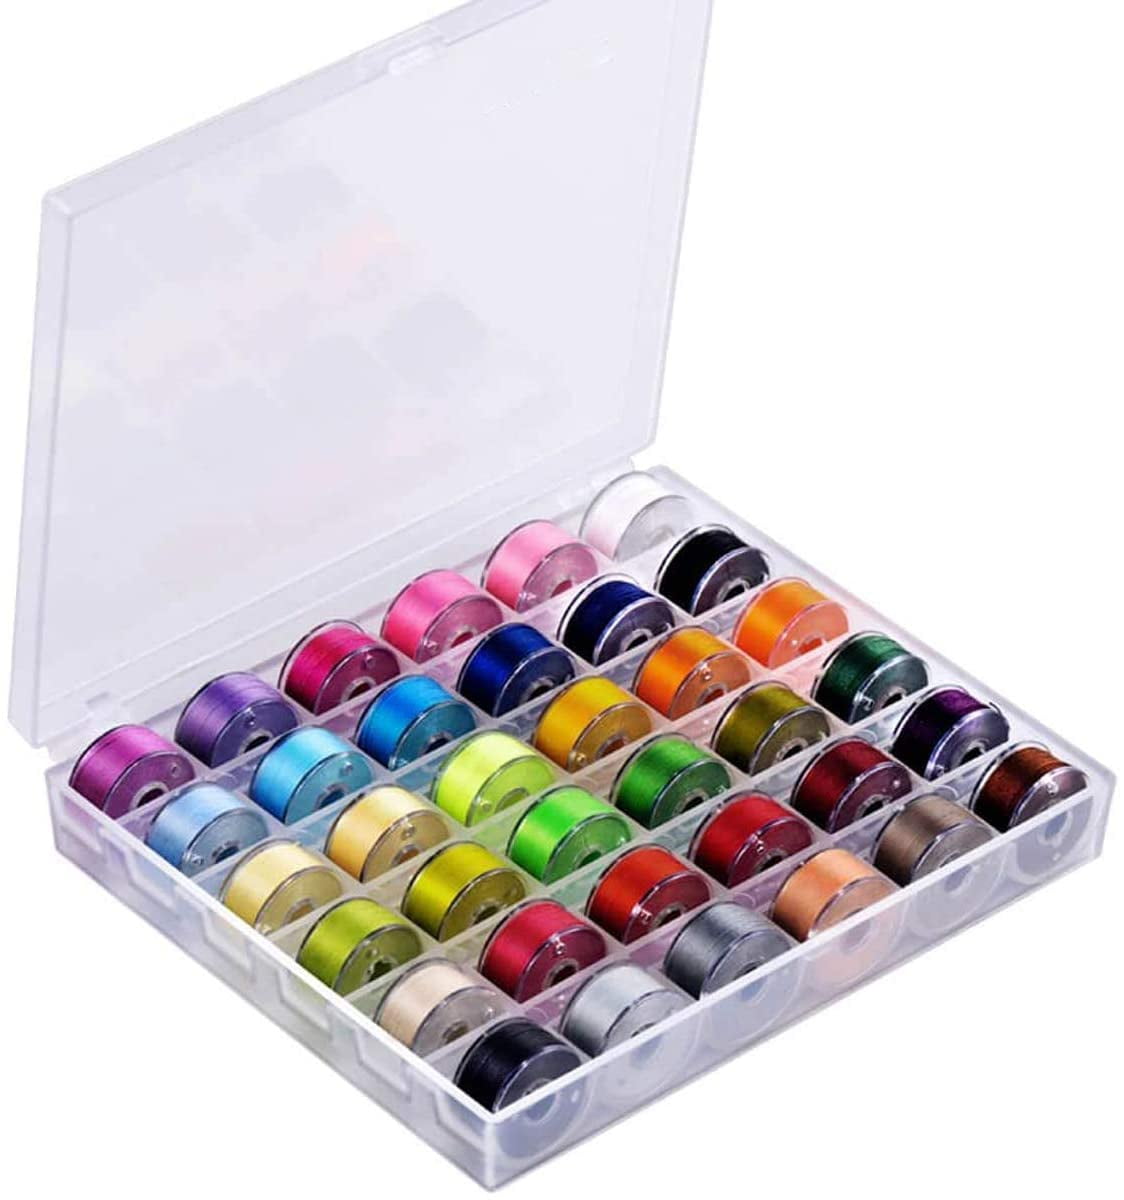 72Pcs 36 Colors Sewing Thread Set with Matching Prewound Bobbin Threads  with Case, 550 Yards per Polyester Thread, Popular Colors Sewing Threads  for